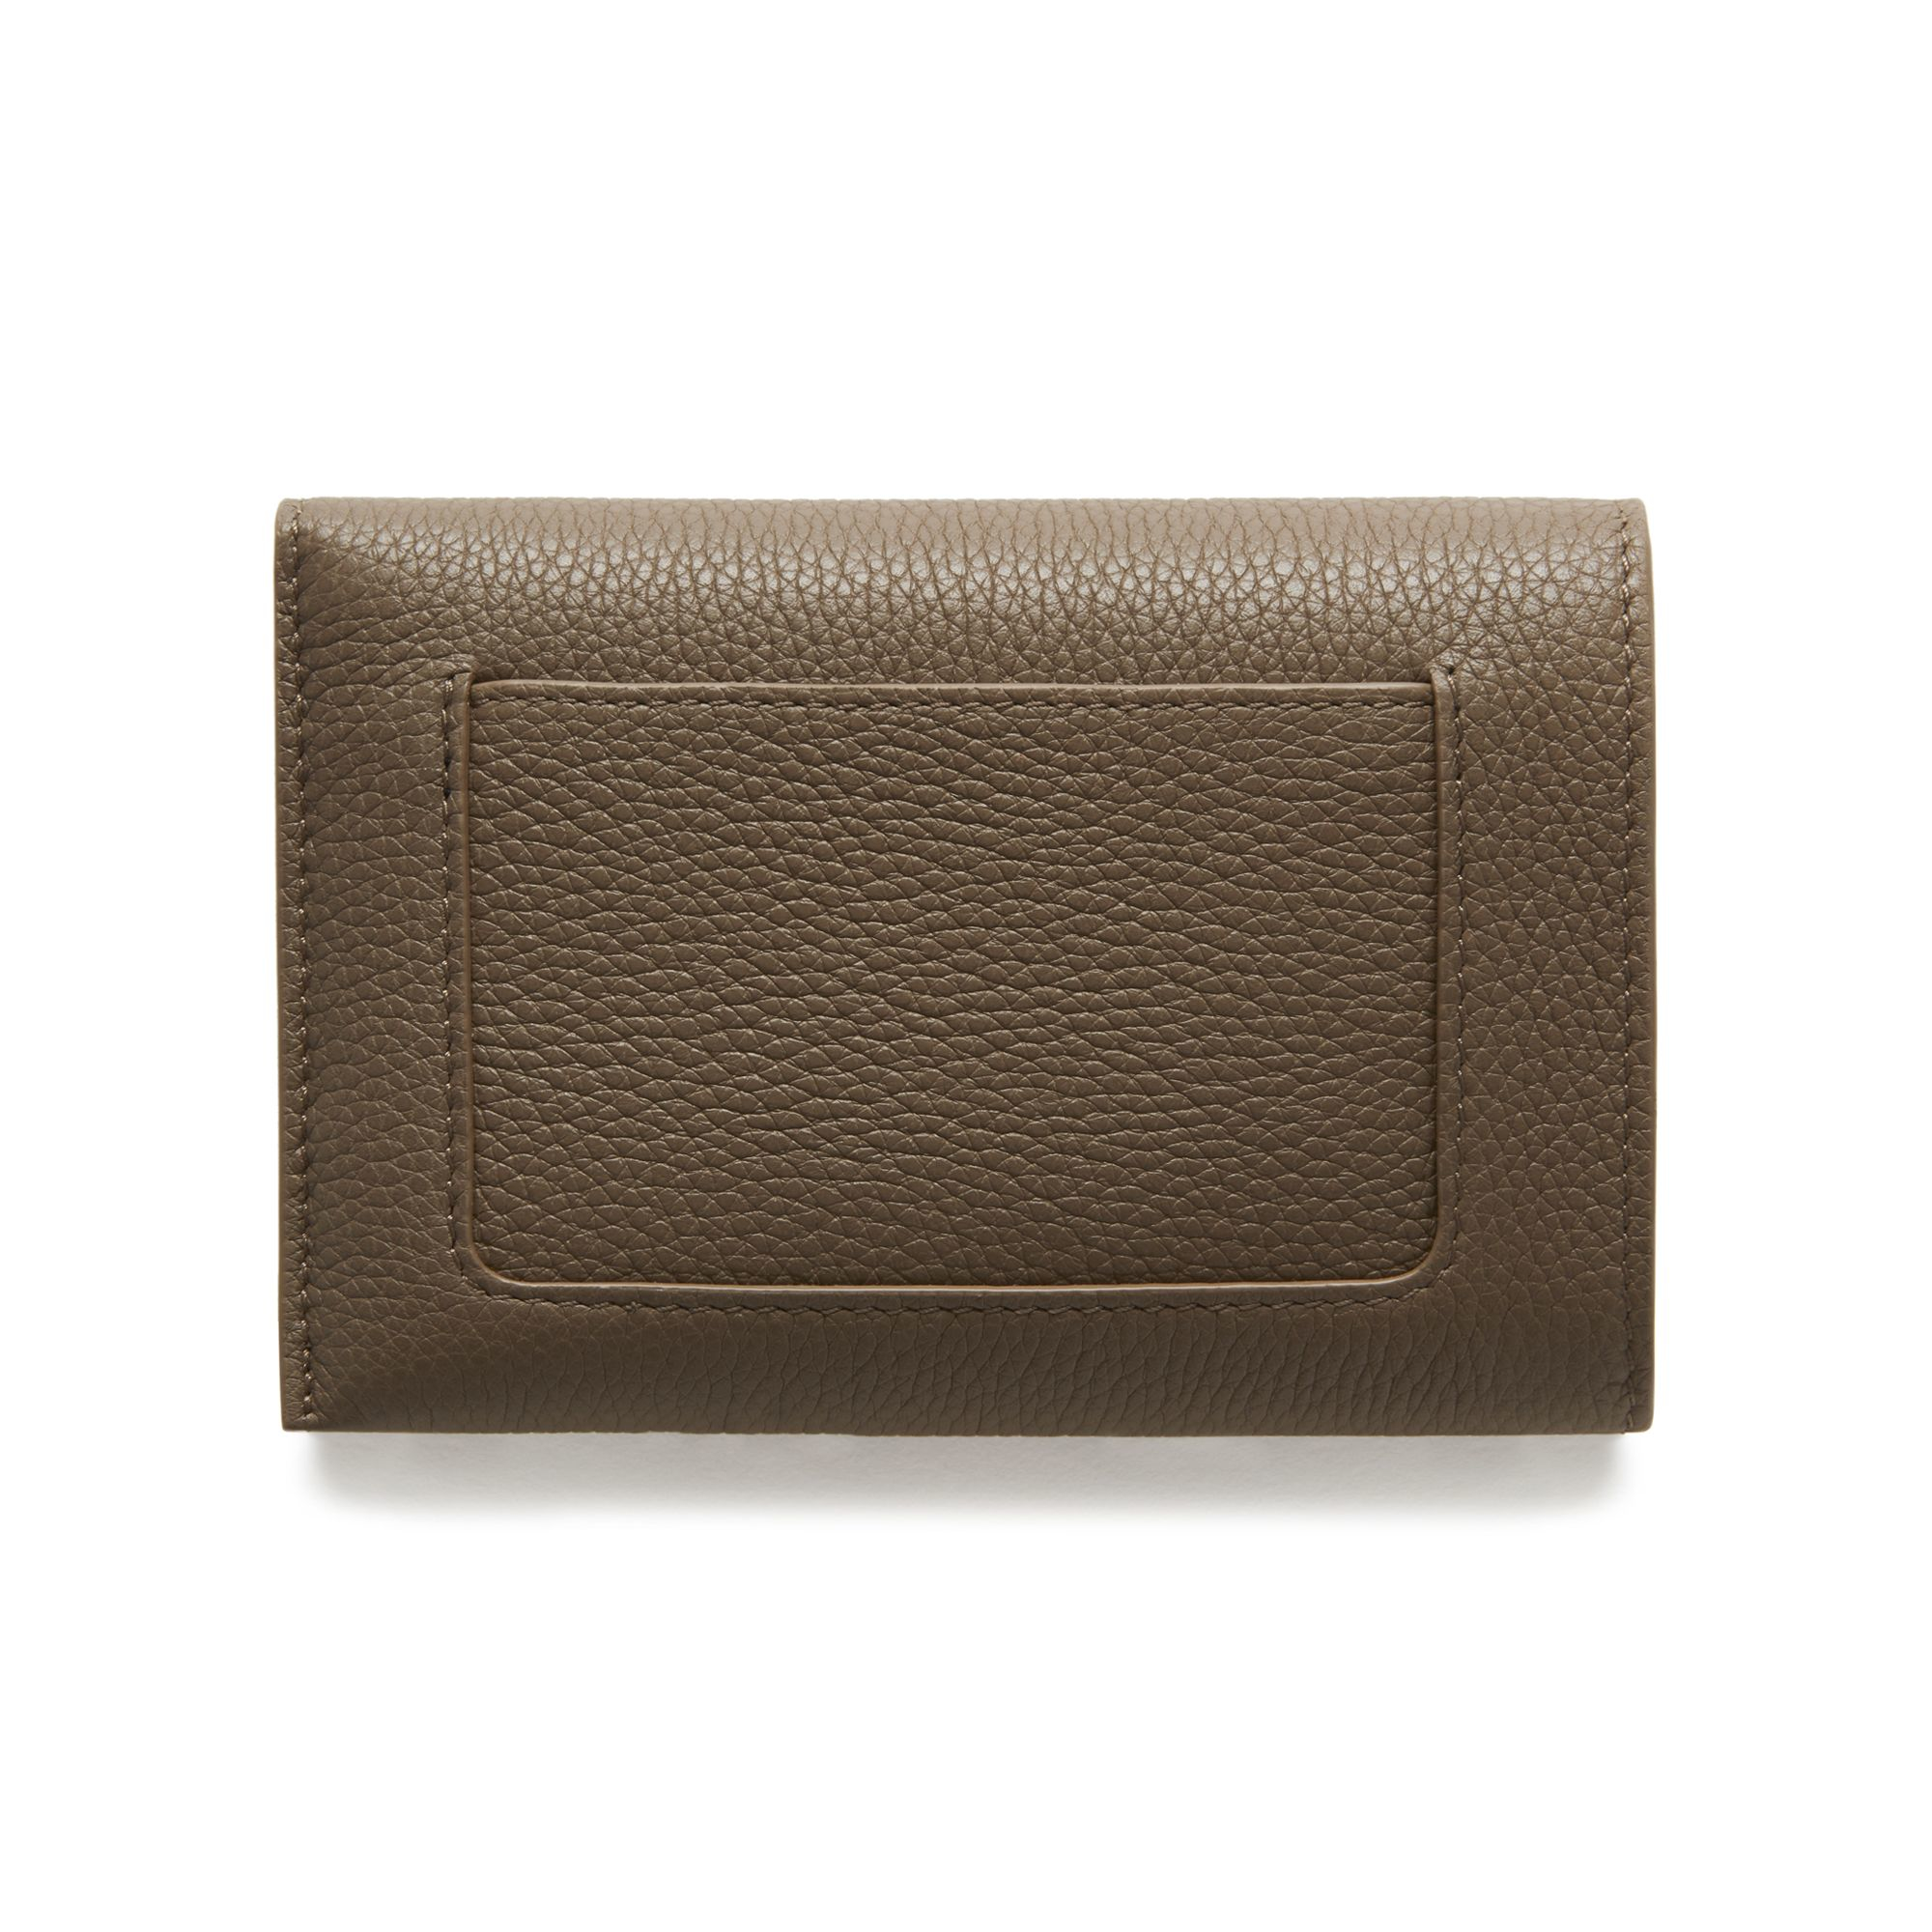 Mulberry black Leather Continental Key Pouch